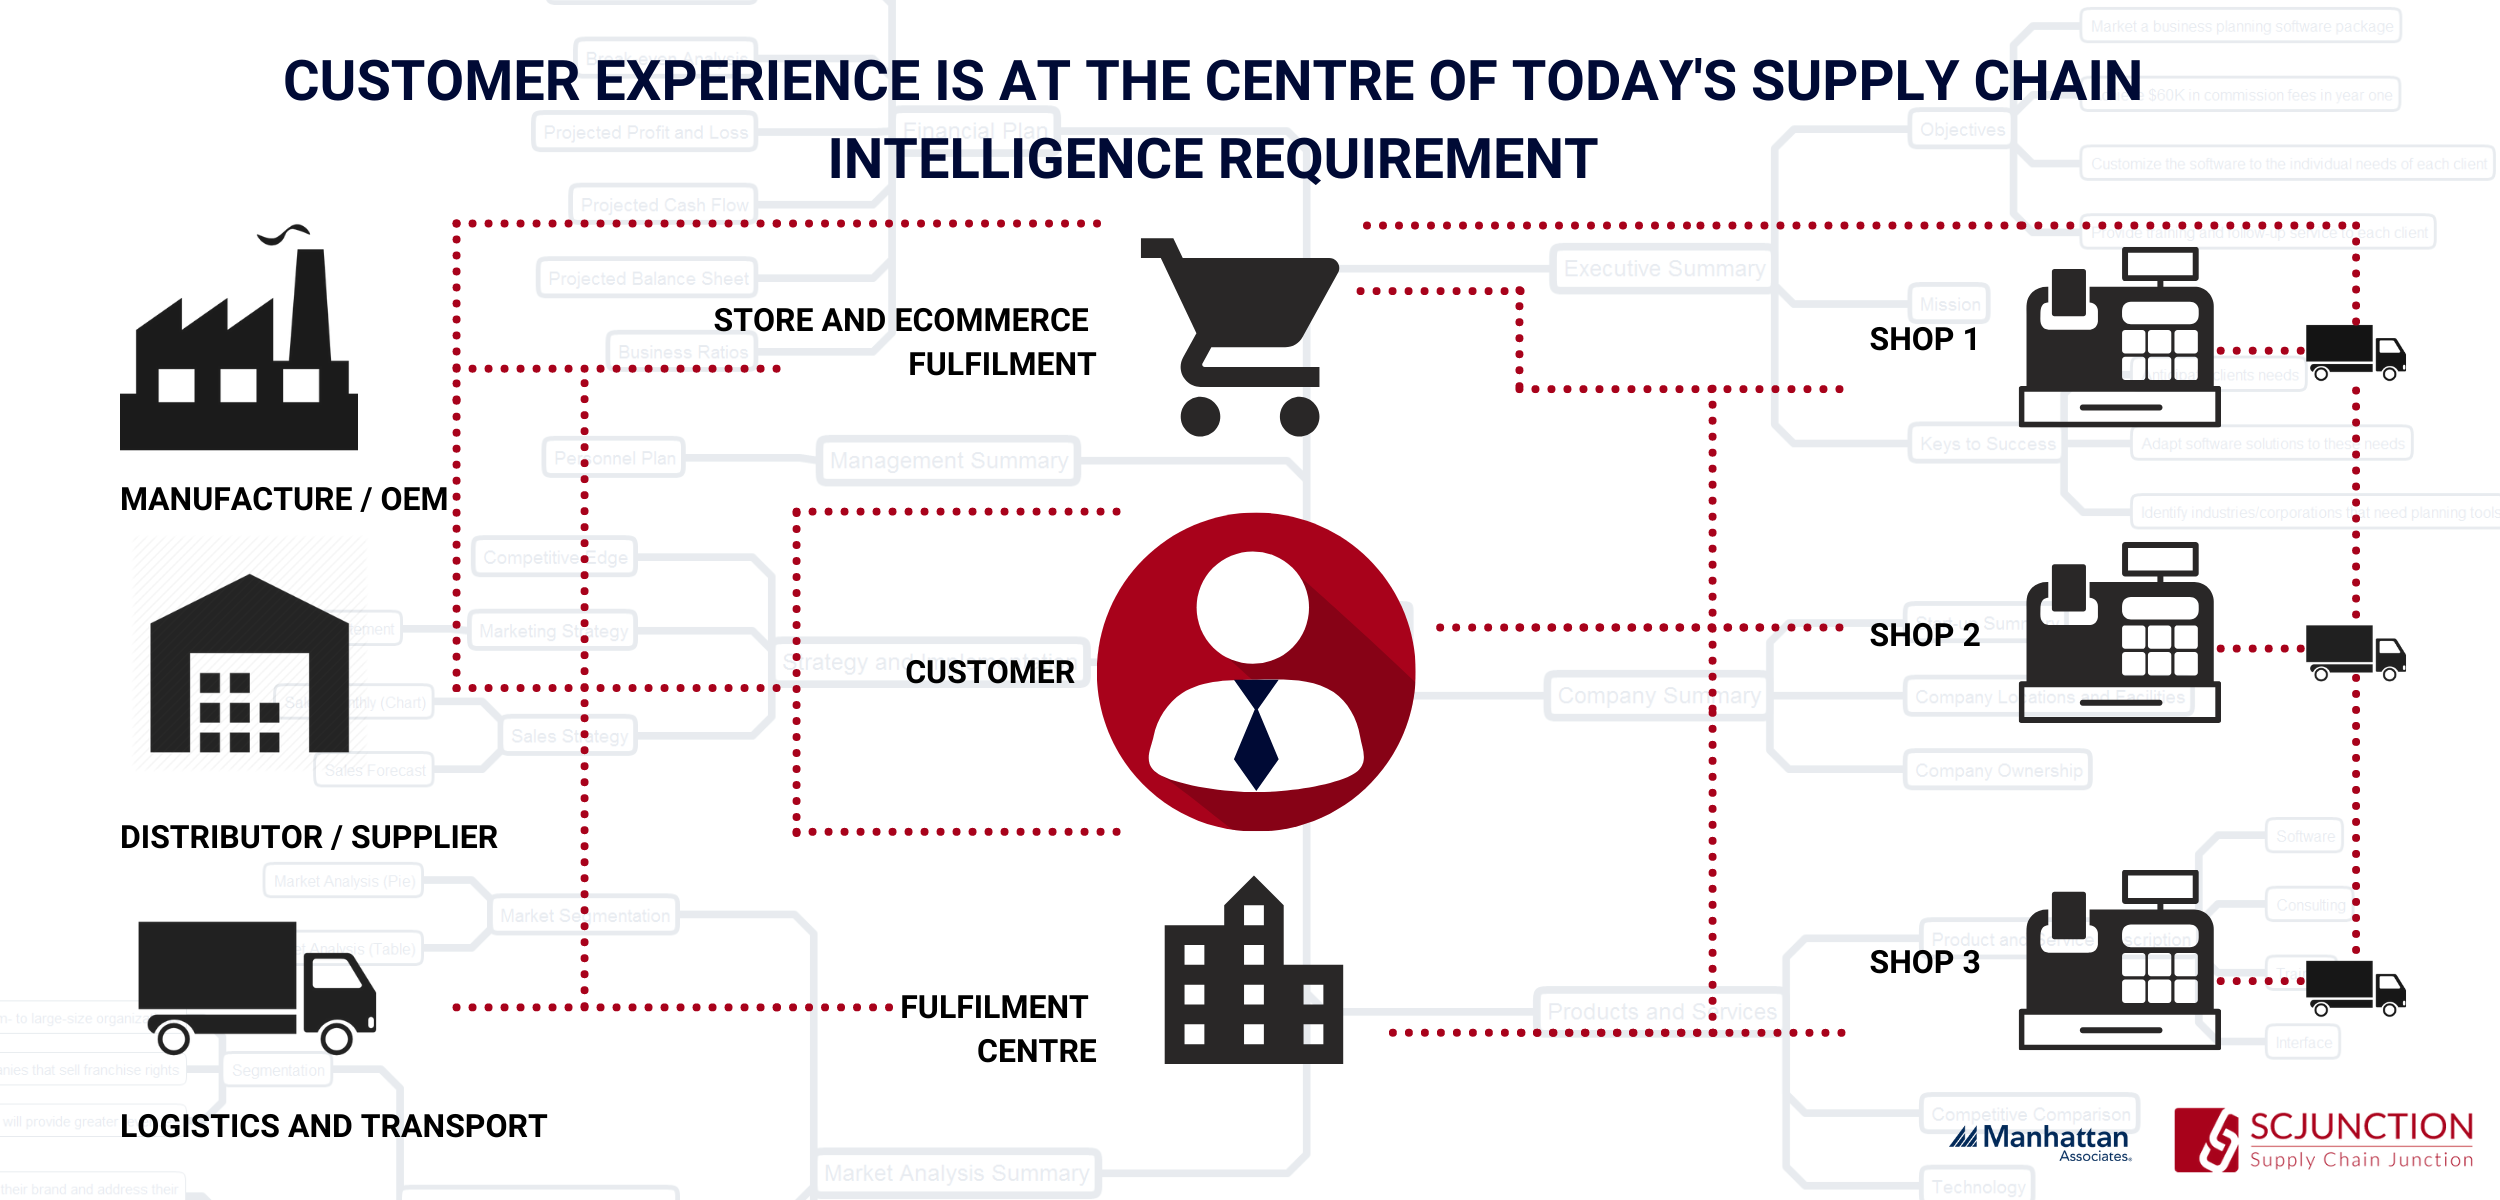 Customer Experience and Supply Chain Intelligence 